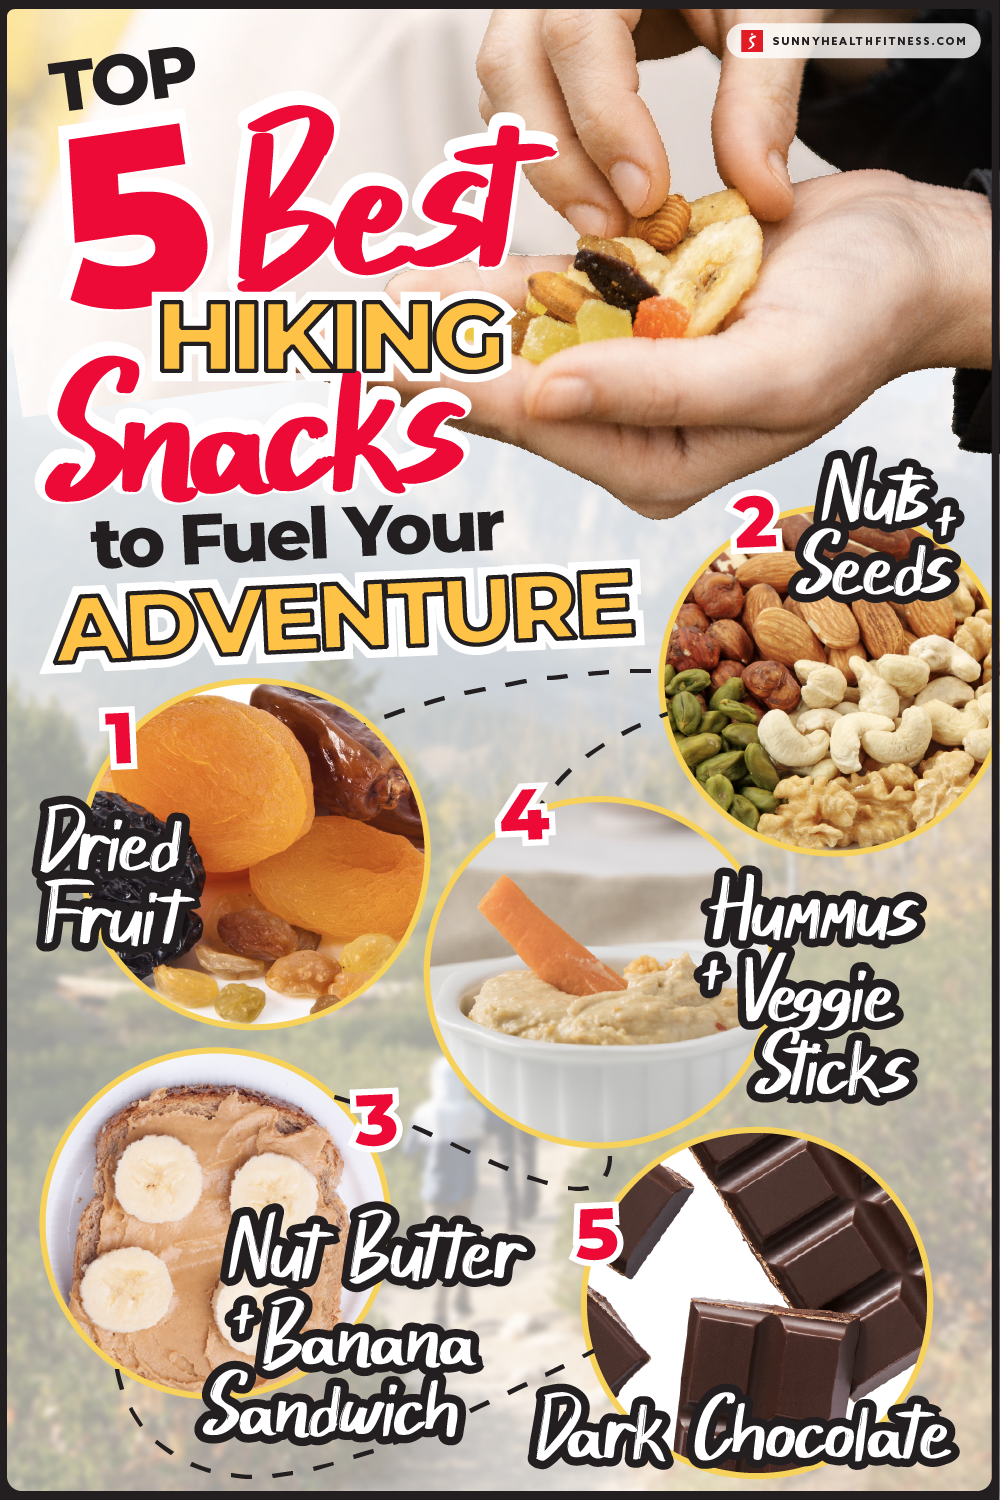 Top 5 Best Hiking Snacks to Fuel Your Adventure Infographic